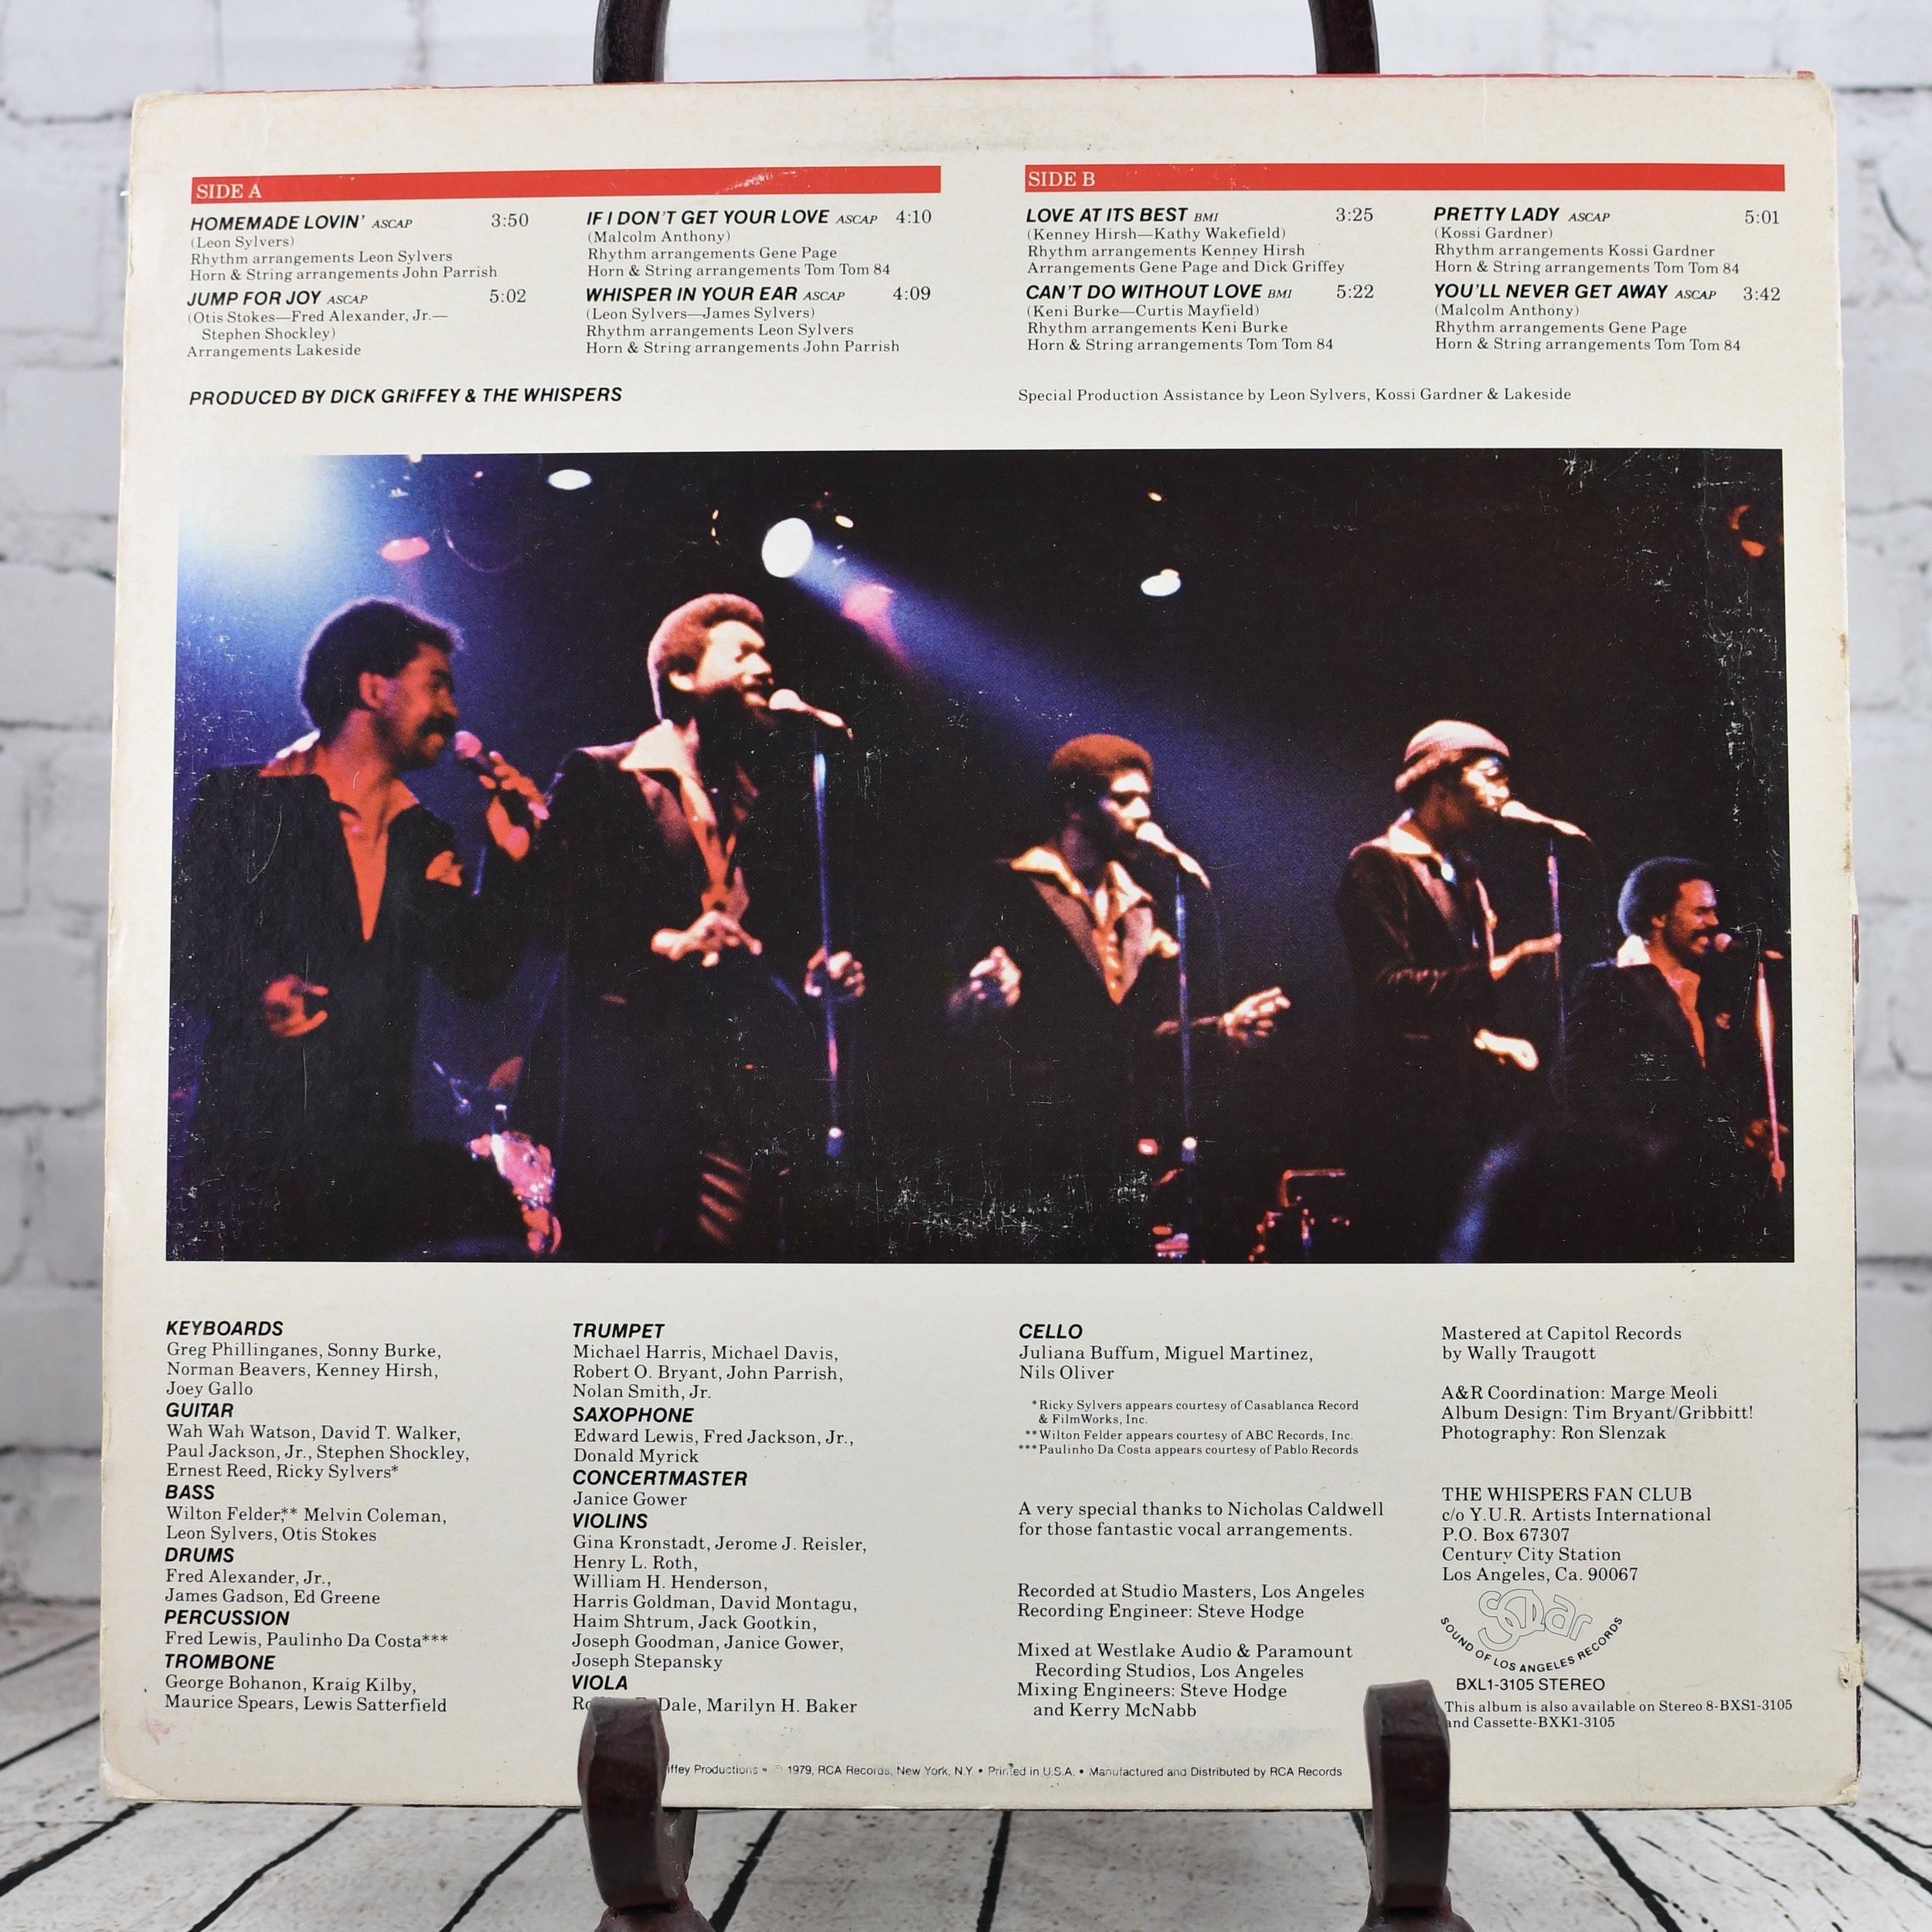 Keep it live by Dazz Band, LP with hossana - Ref:117654161